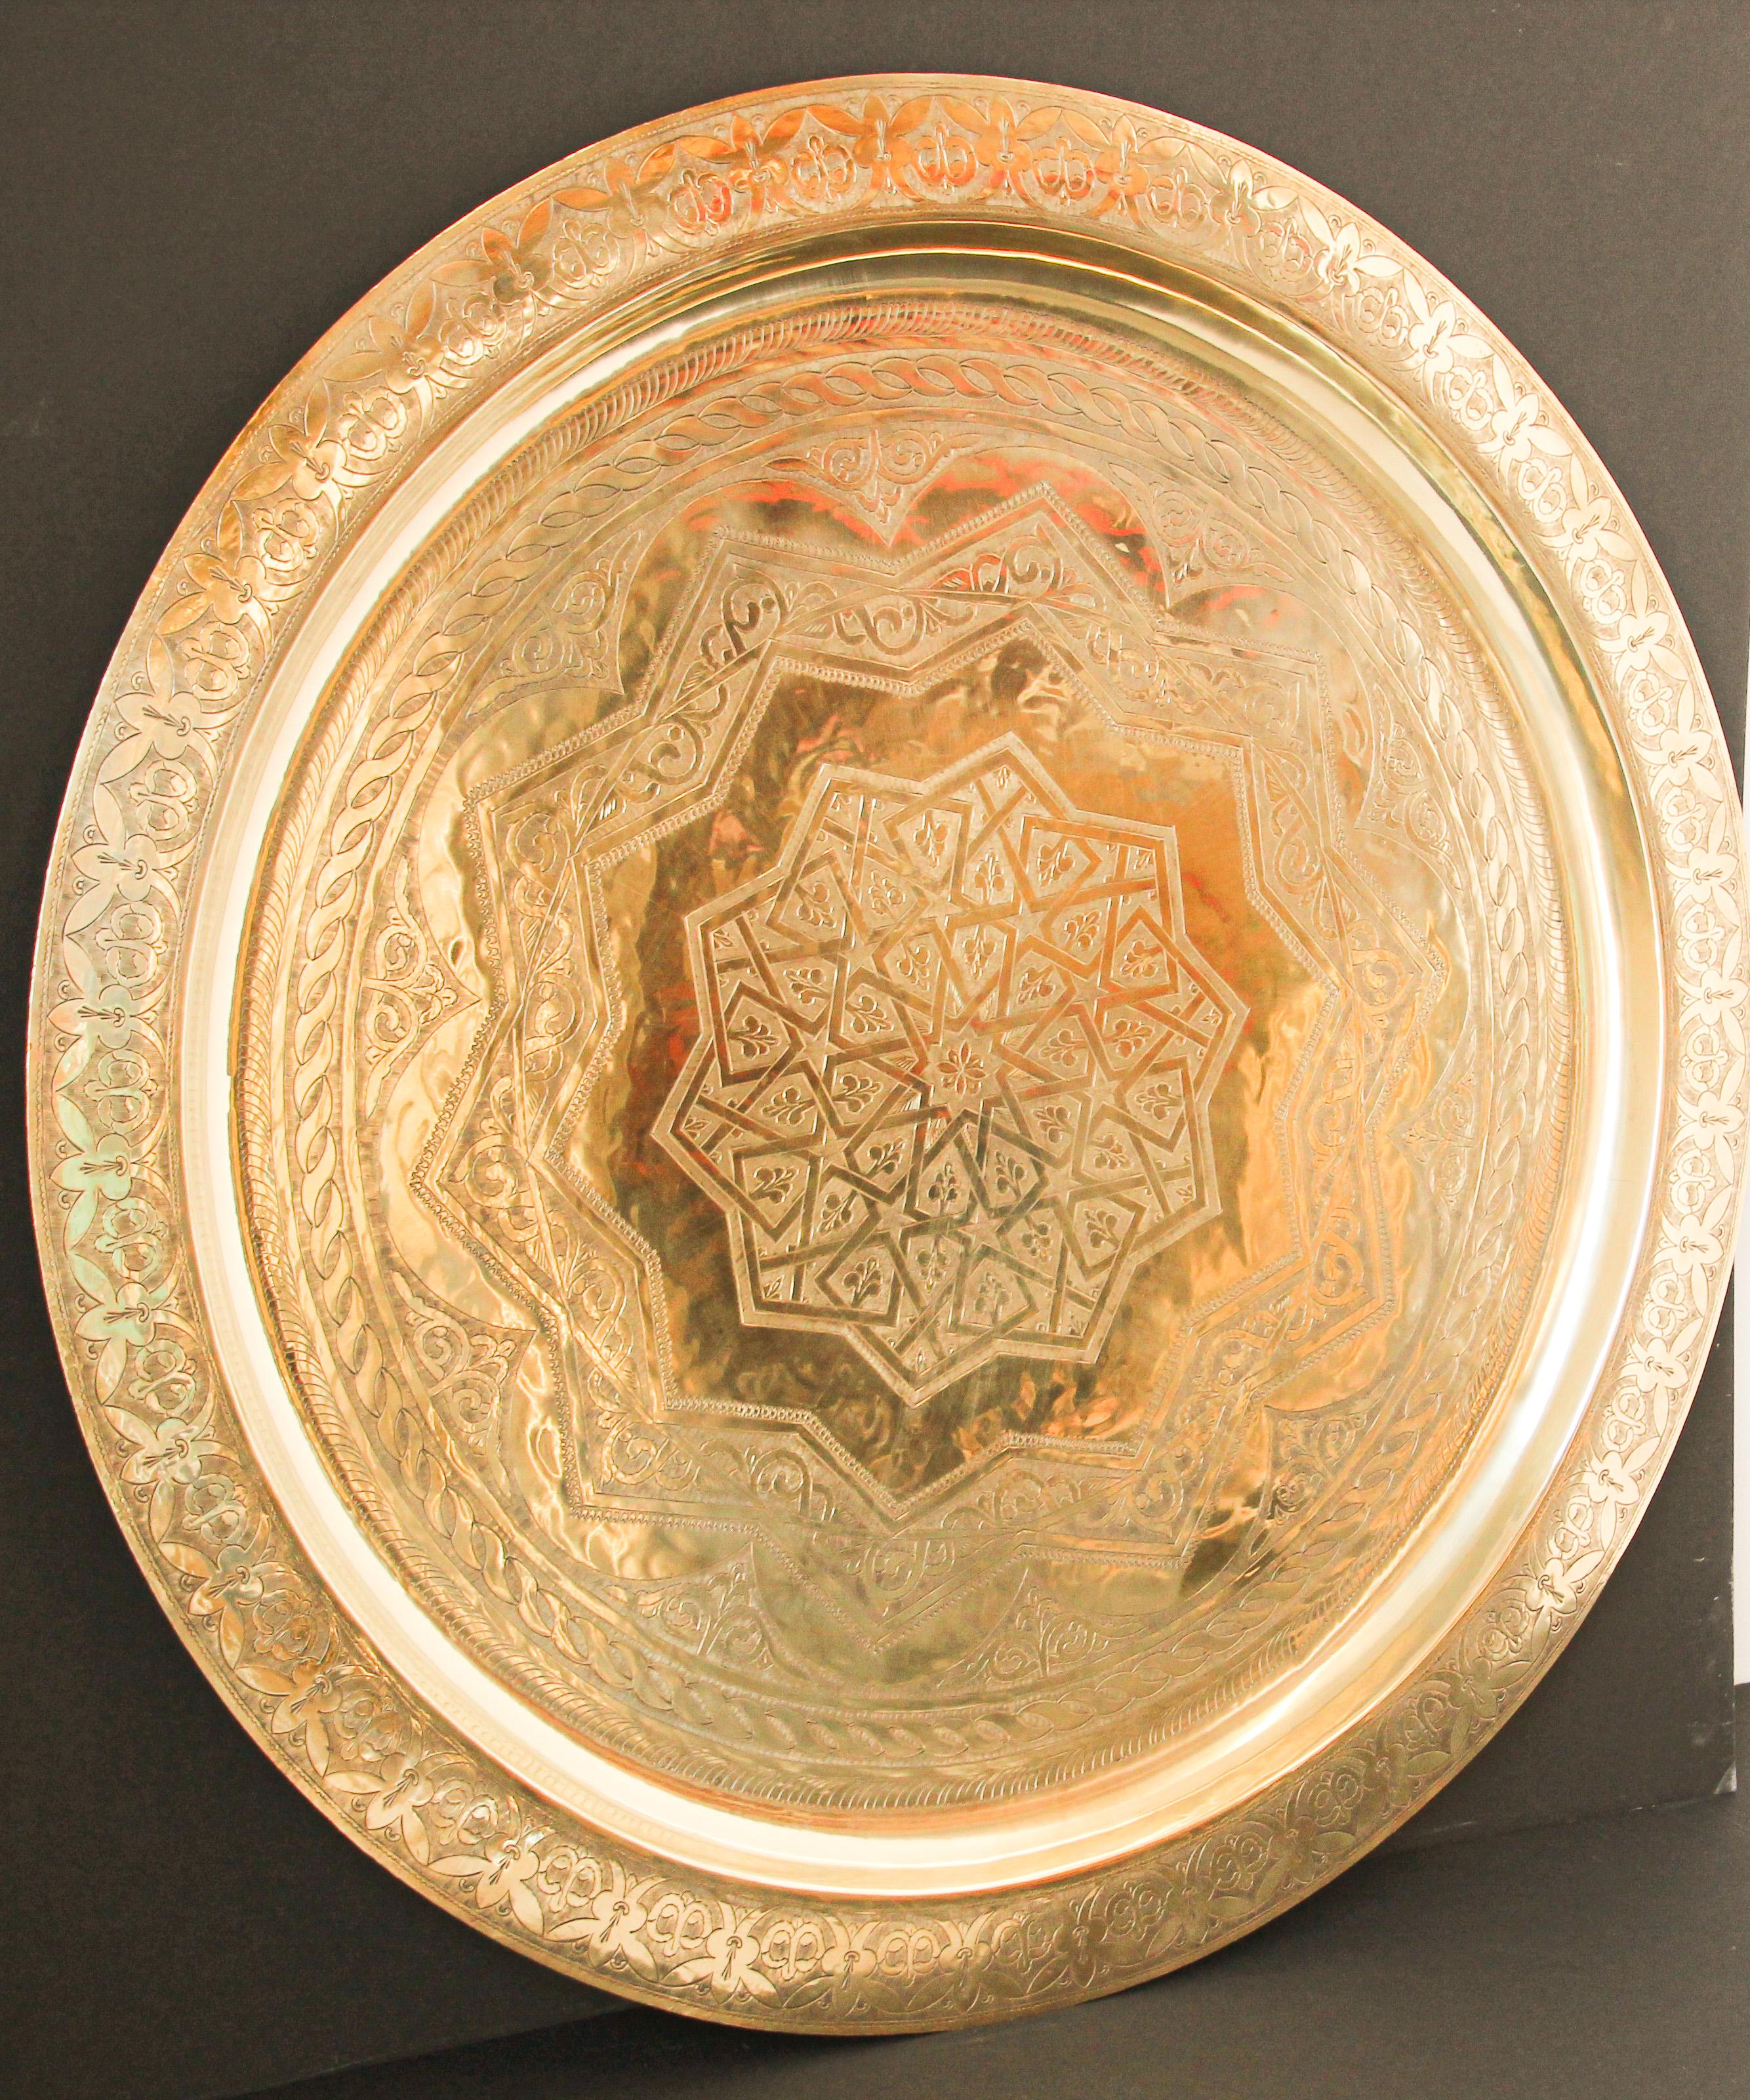 Monumental Moroccan metal polished brass tray platter.
Polished decorative metal brass tray with very fine intricate designs.
Hand-hammered and chiseled in floral Moorish style with a large lotus flower in the middle, pie crust border.
Heavy